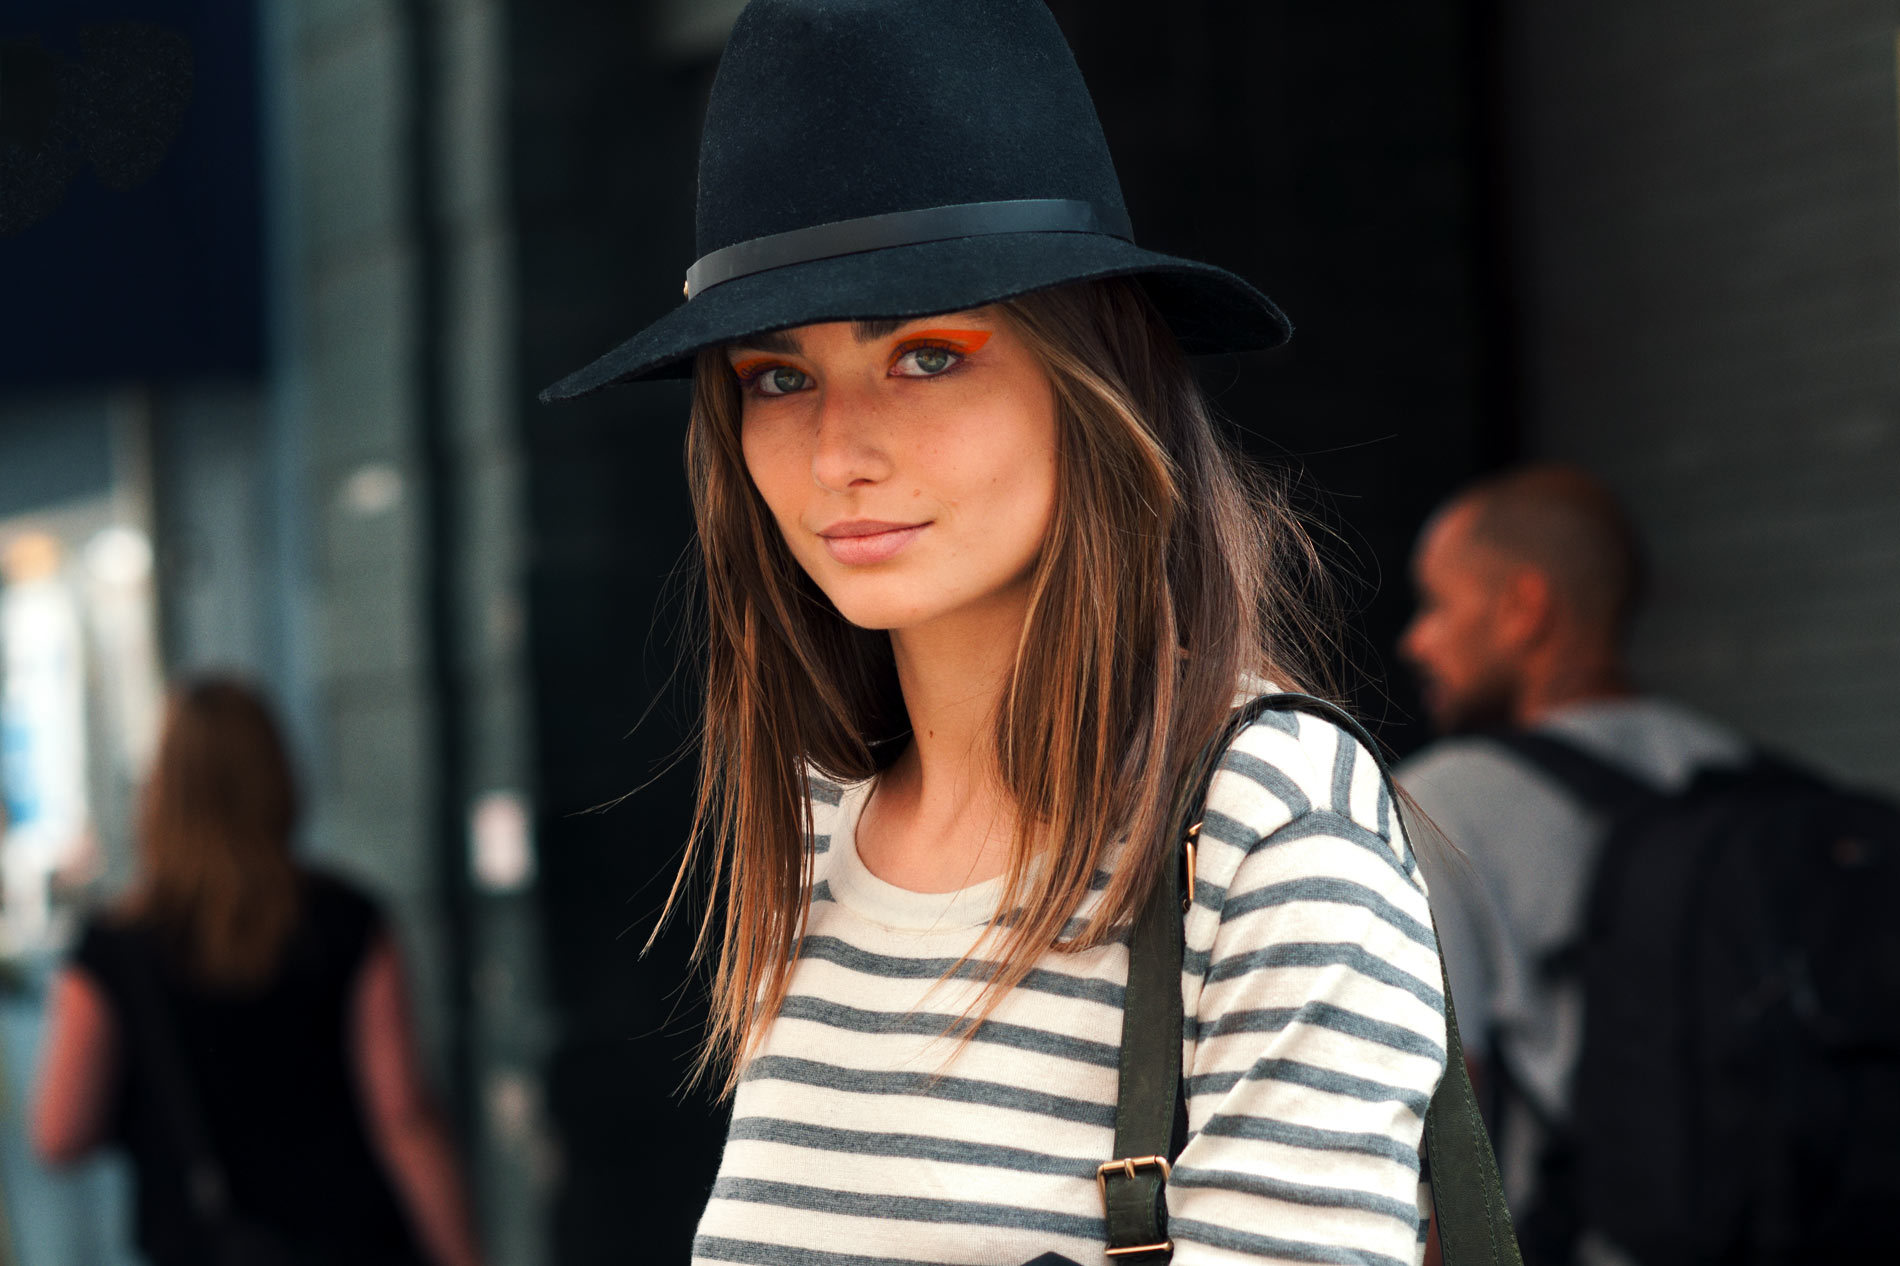 Andreea Diaconu Wallpapers Images Photos Pictures Backgrounds